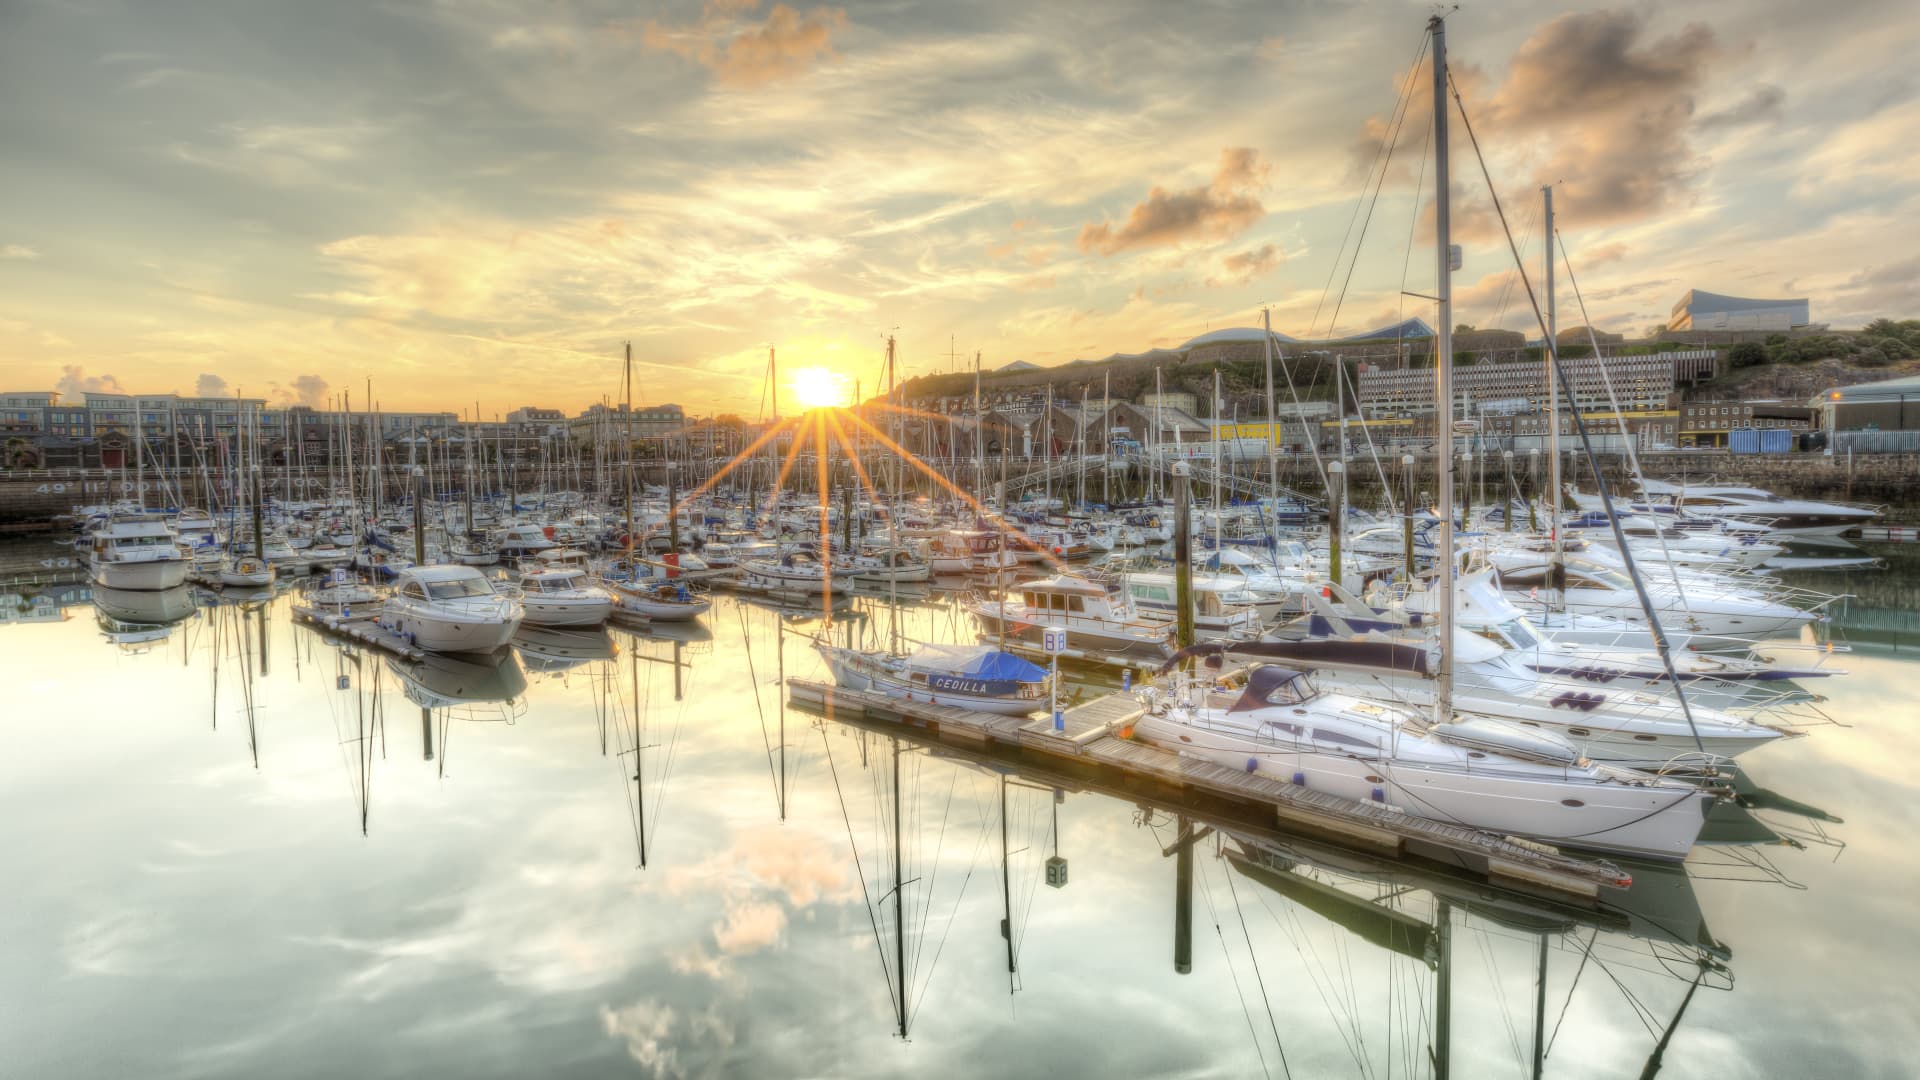 The marina at St. Helier, Jersey's financial center. The island is known for its tax incentives for residents and businesses.